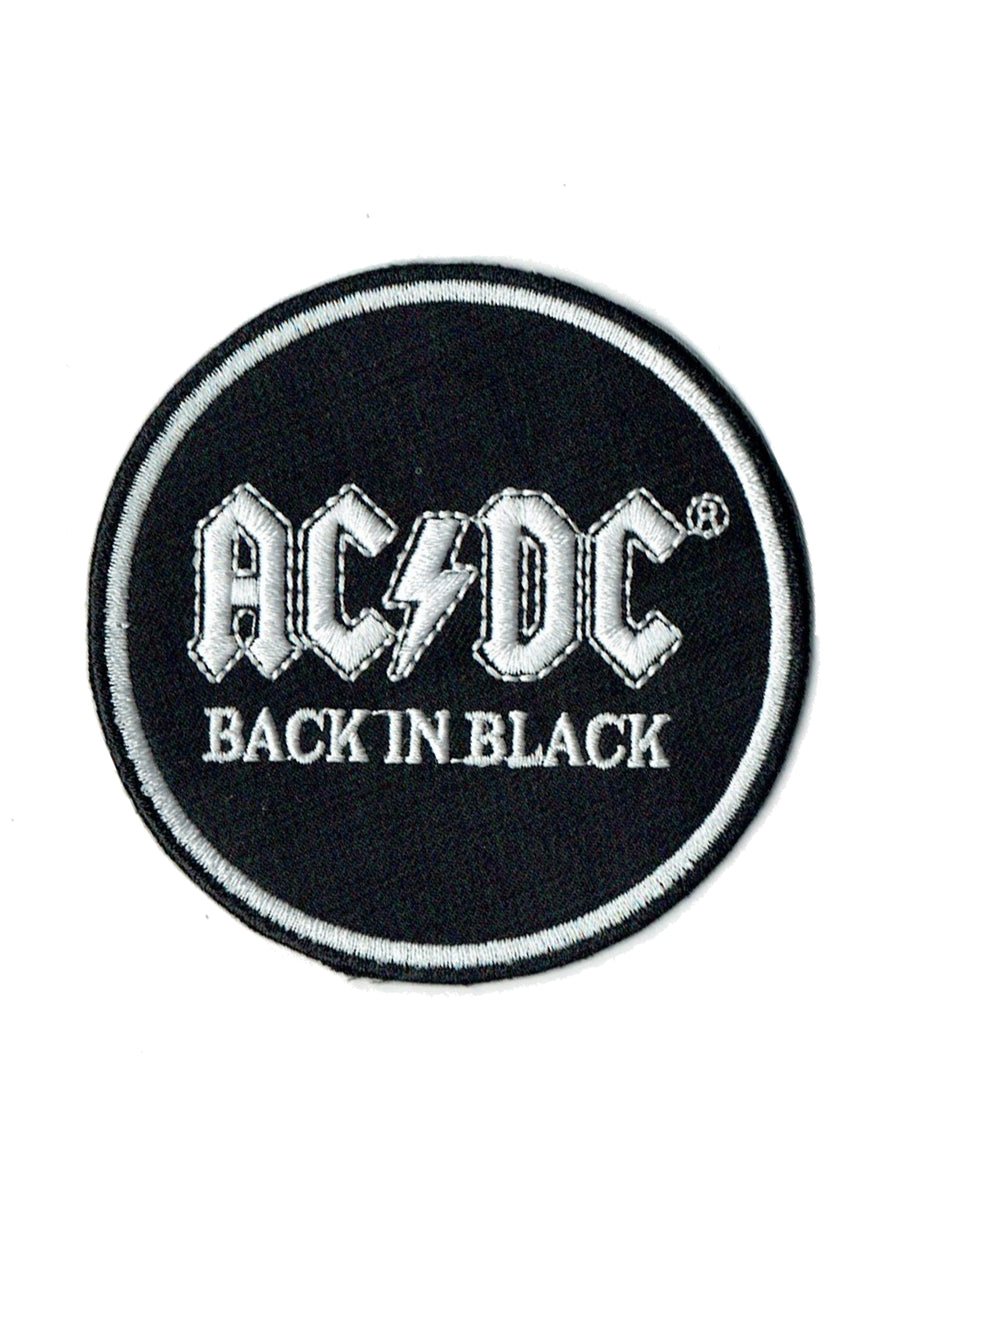 AC/DC Back In Black Round Official Woven Patch Brand New